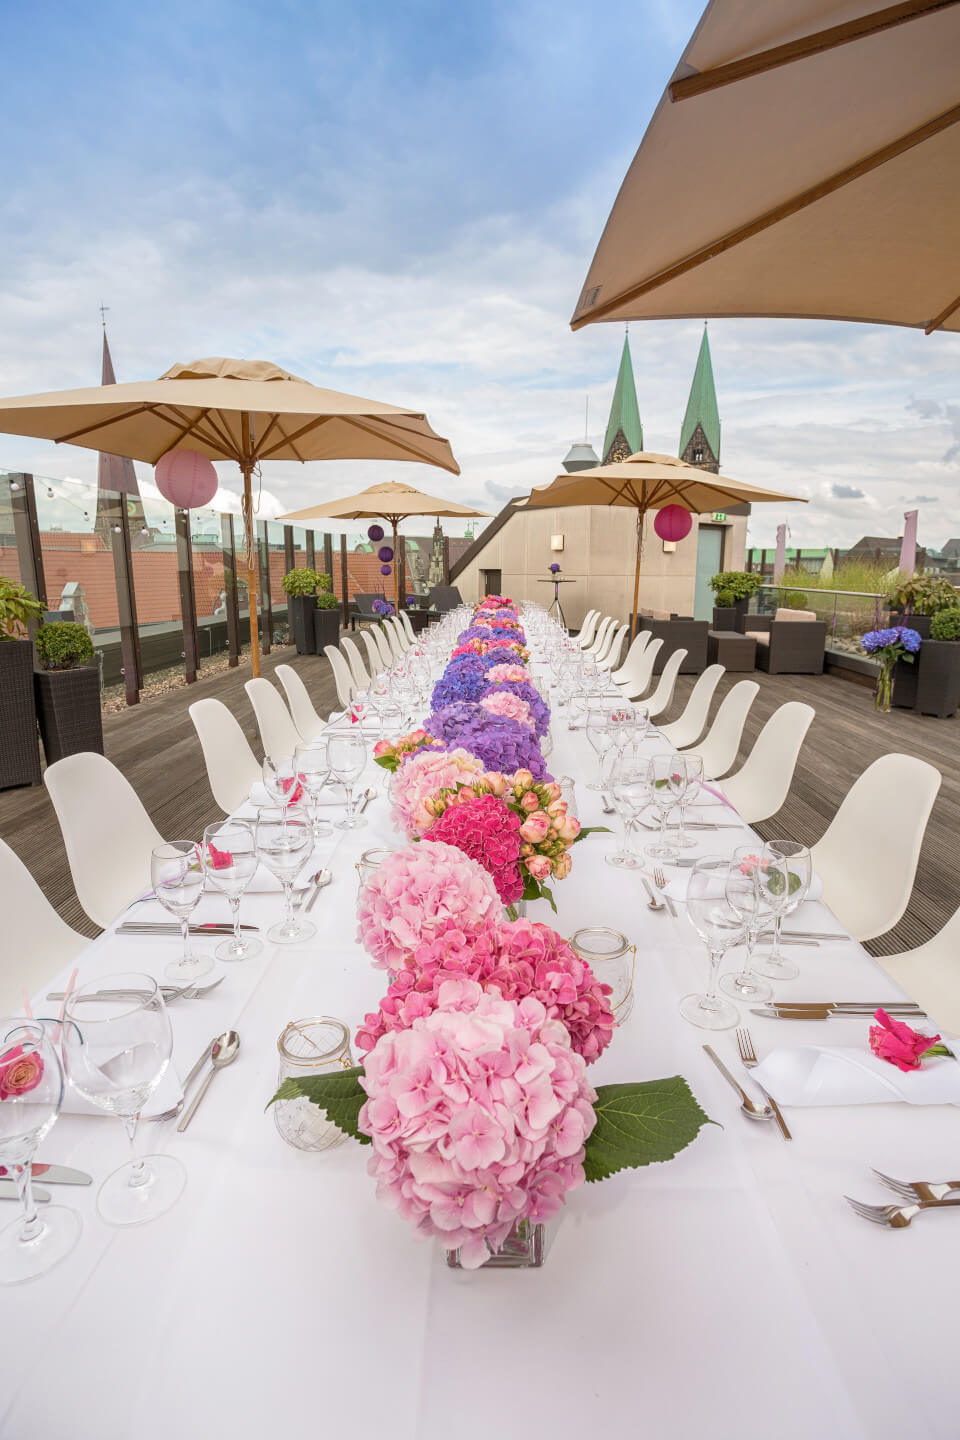 endless wedding table with colorful flowers